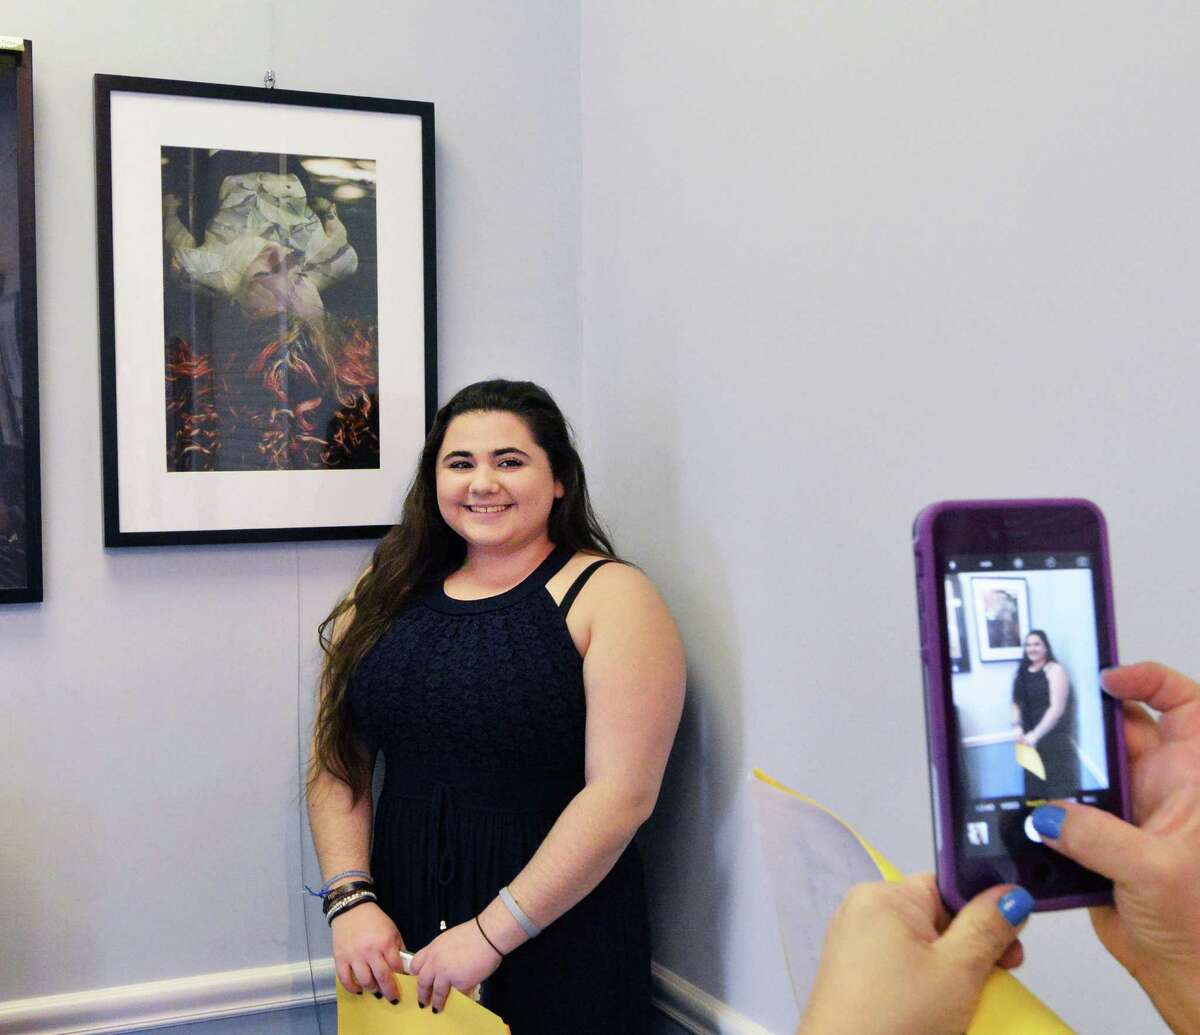 Greenwich High School senior Estella Perrone,18, with her surrealistic photography work that was part of the Art Society of Old Greenwich Spring Art Show at the Garden Education Center in Cos Cob, Friday night, April 8, 2016. Perrone was one of three GHS student scholarship award winners along with Monica Stevenson for a charcoal portrait and Andreas Zervos for ceramics. Barbara Stretton of the Art Society of Old Greenwich said there are about 35 works in the show and that the show will be available for viewing at the center until April 29th. According to Stretton viewing hours are during the week, Monday to Friday, 9 am to 4 pm.